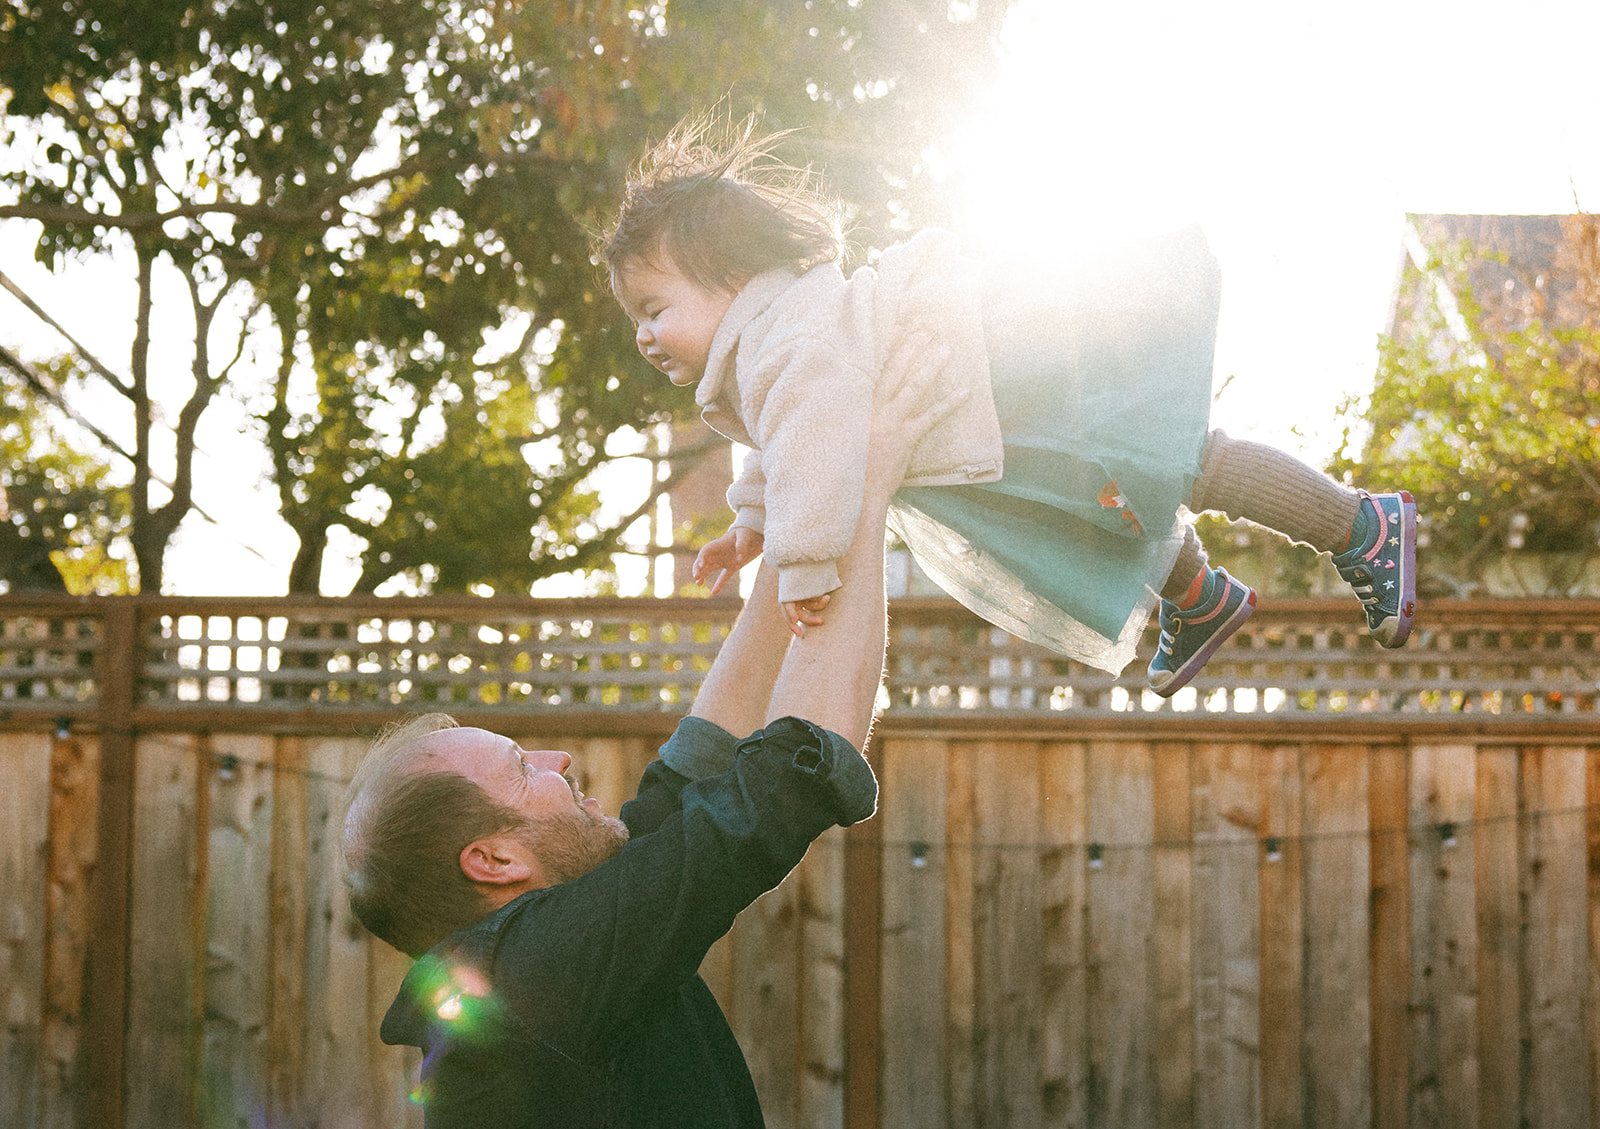 dad throwing baby daughter in the air in their backyard at golden hour